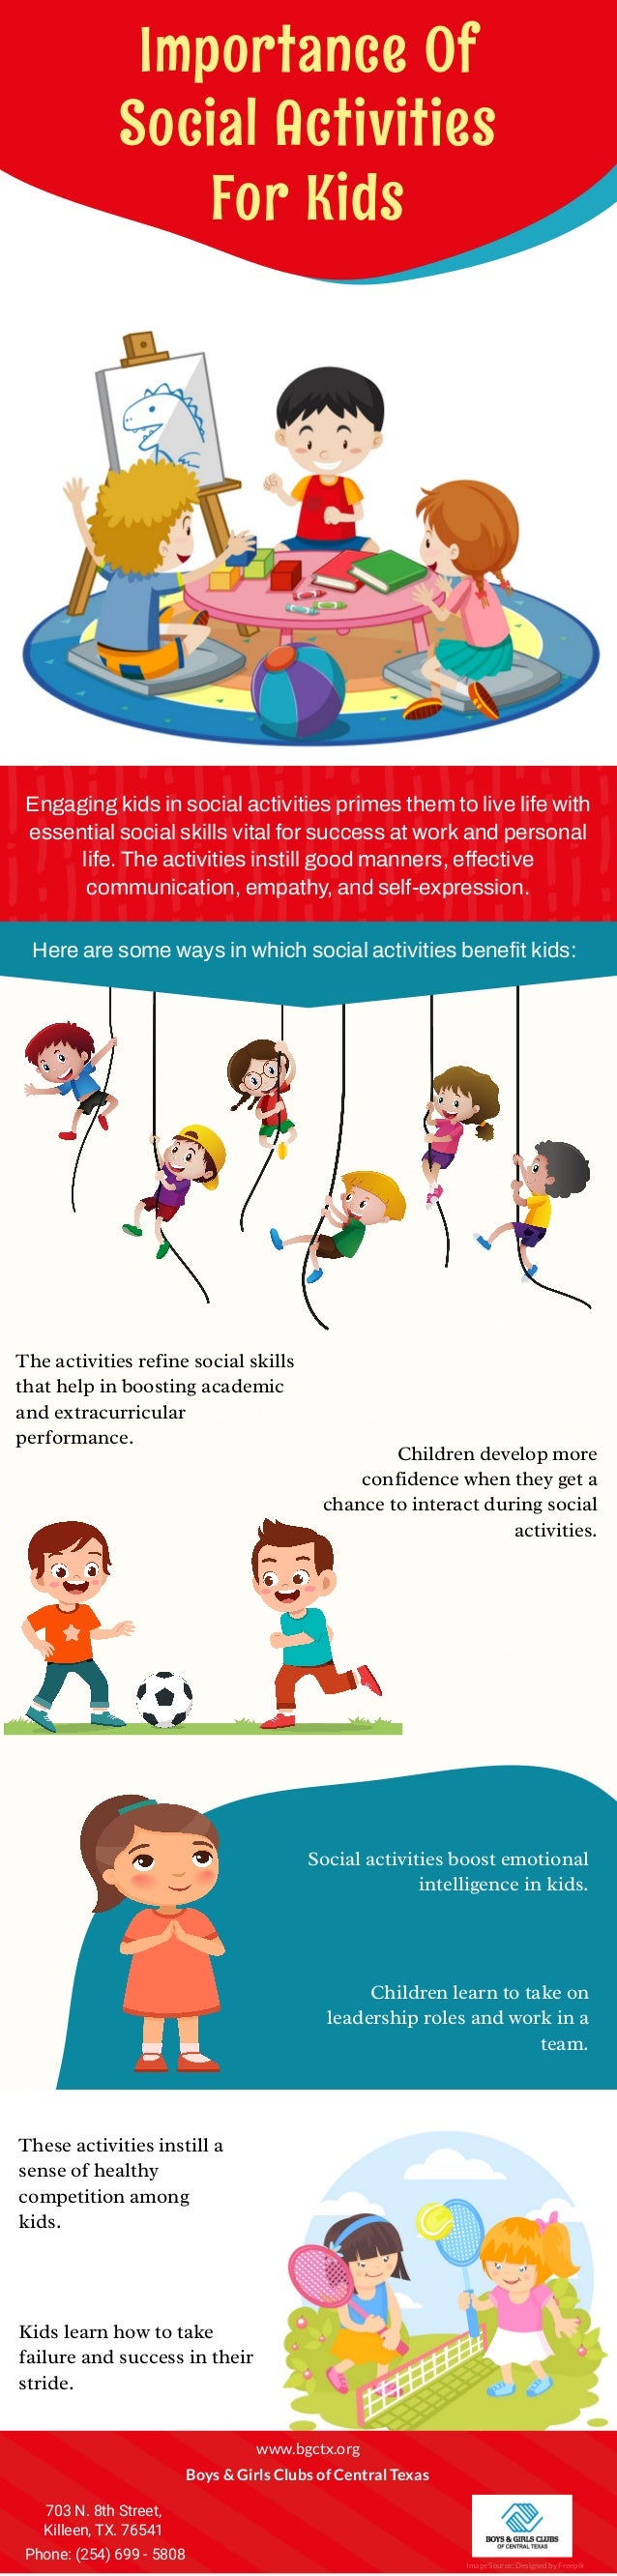 Importance Of
Social Activities
For Kids
Engaging kids in social activities primes them to live life with
essential social skills vital for success at work and personal
life. The activities instill good manners, effective
communication, empathy, and self-expression.
The activities refine social skills
that help in boosting academic
and extracurricular
performance.
Children develop more
confidence when they get a
chance to interact during social
activities.
Here are some ways in which social activities benefit kids:
Social activities boost emotional
intelligence in kids.
Children learn to take on
leadership roles and work in a
team.
These activities instill a
sense of healthy
competition among
kids.
Kids learn how to take
failure and success in their
stride.
www.bgctx.org
Boys & Girls Clubs of Central Texas
703 N. 8th Street,
Killeen, TX. 76541
Phone: (254) 699 - 5808
Image Source: Designed by Freepik
 